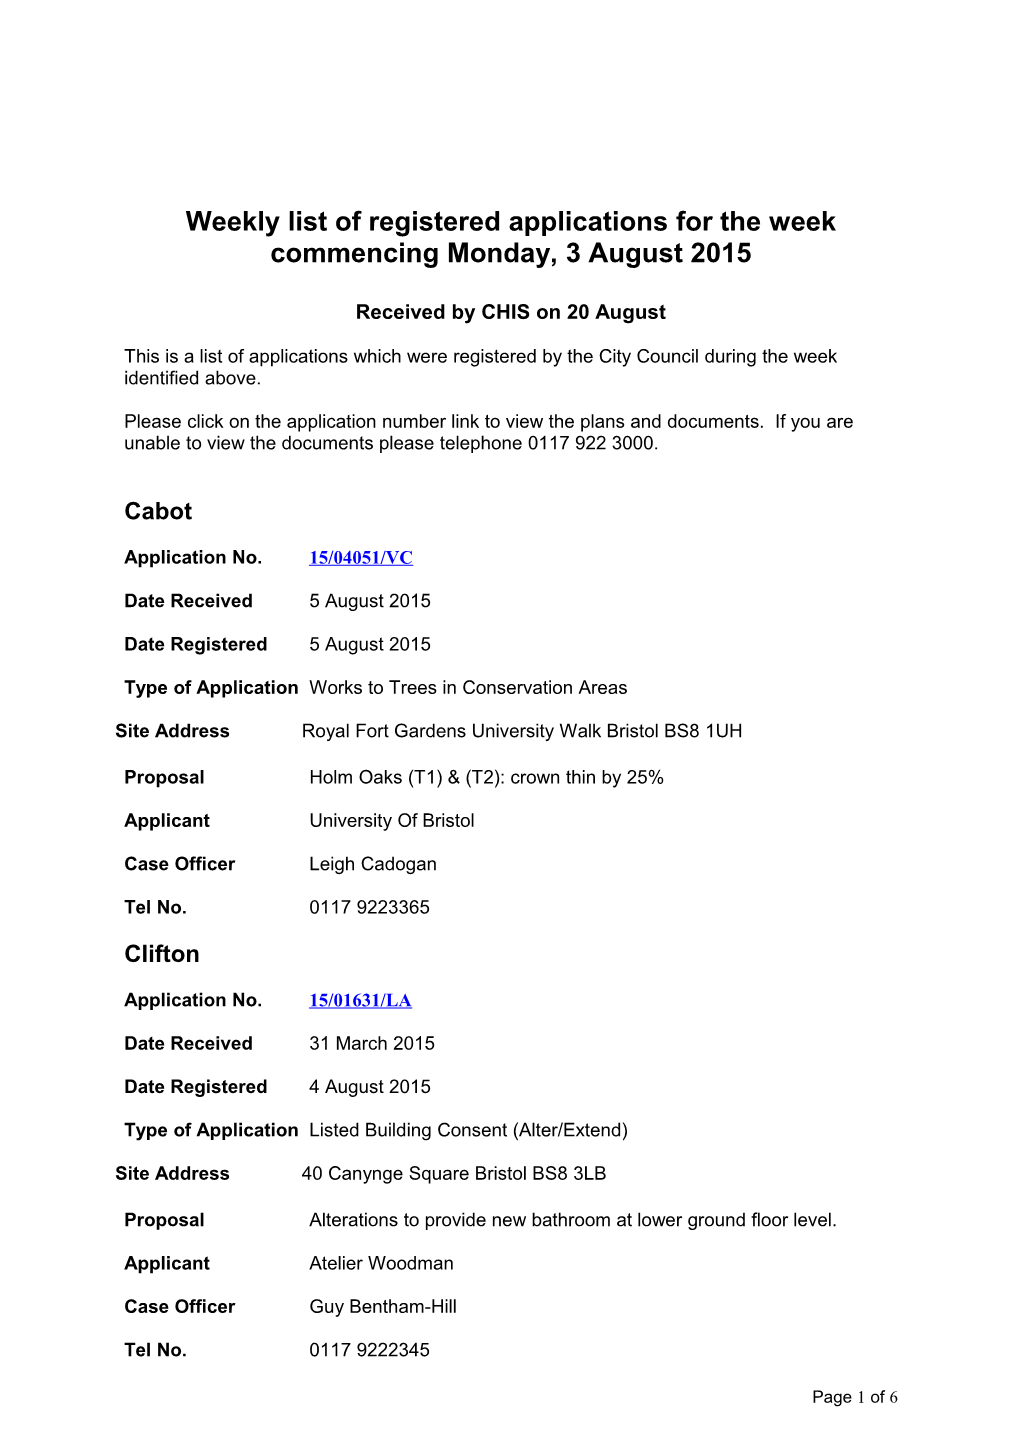 Weekly List of Registered Applications for the Week Commencing Monday, 3 August 2015